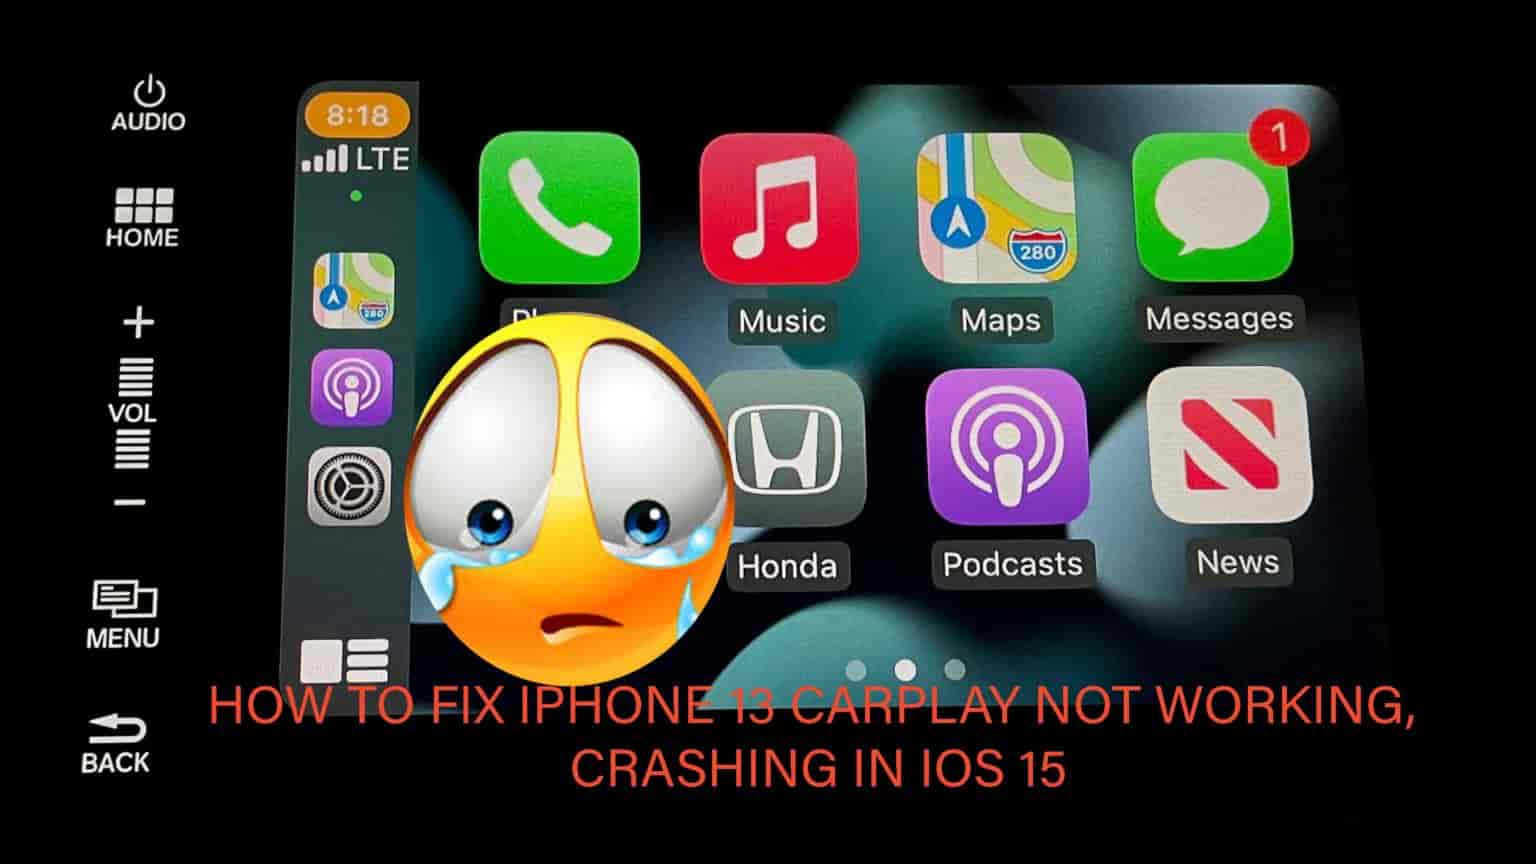 iOS 15 – CarPlay issues for some iPhones - thetechpapa.com